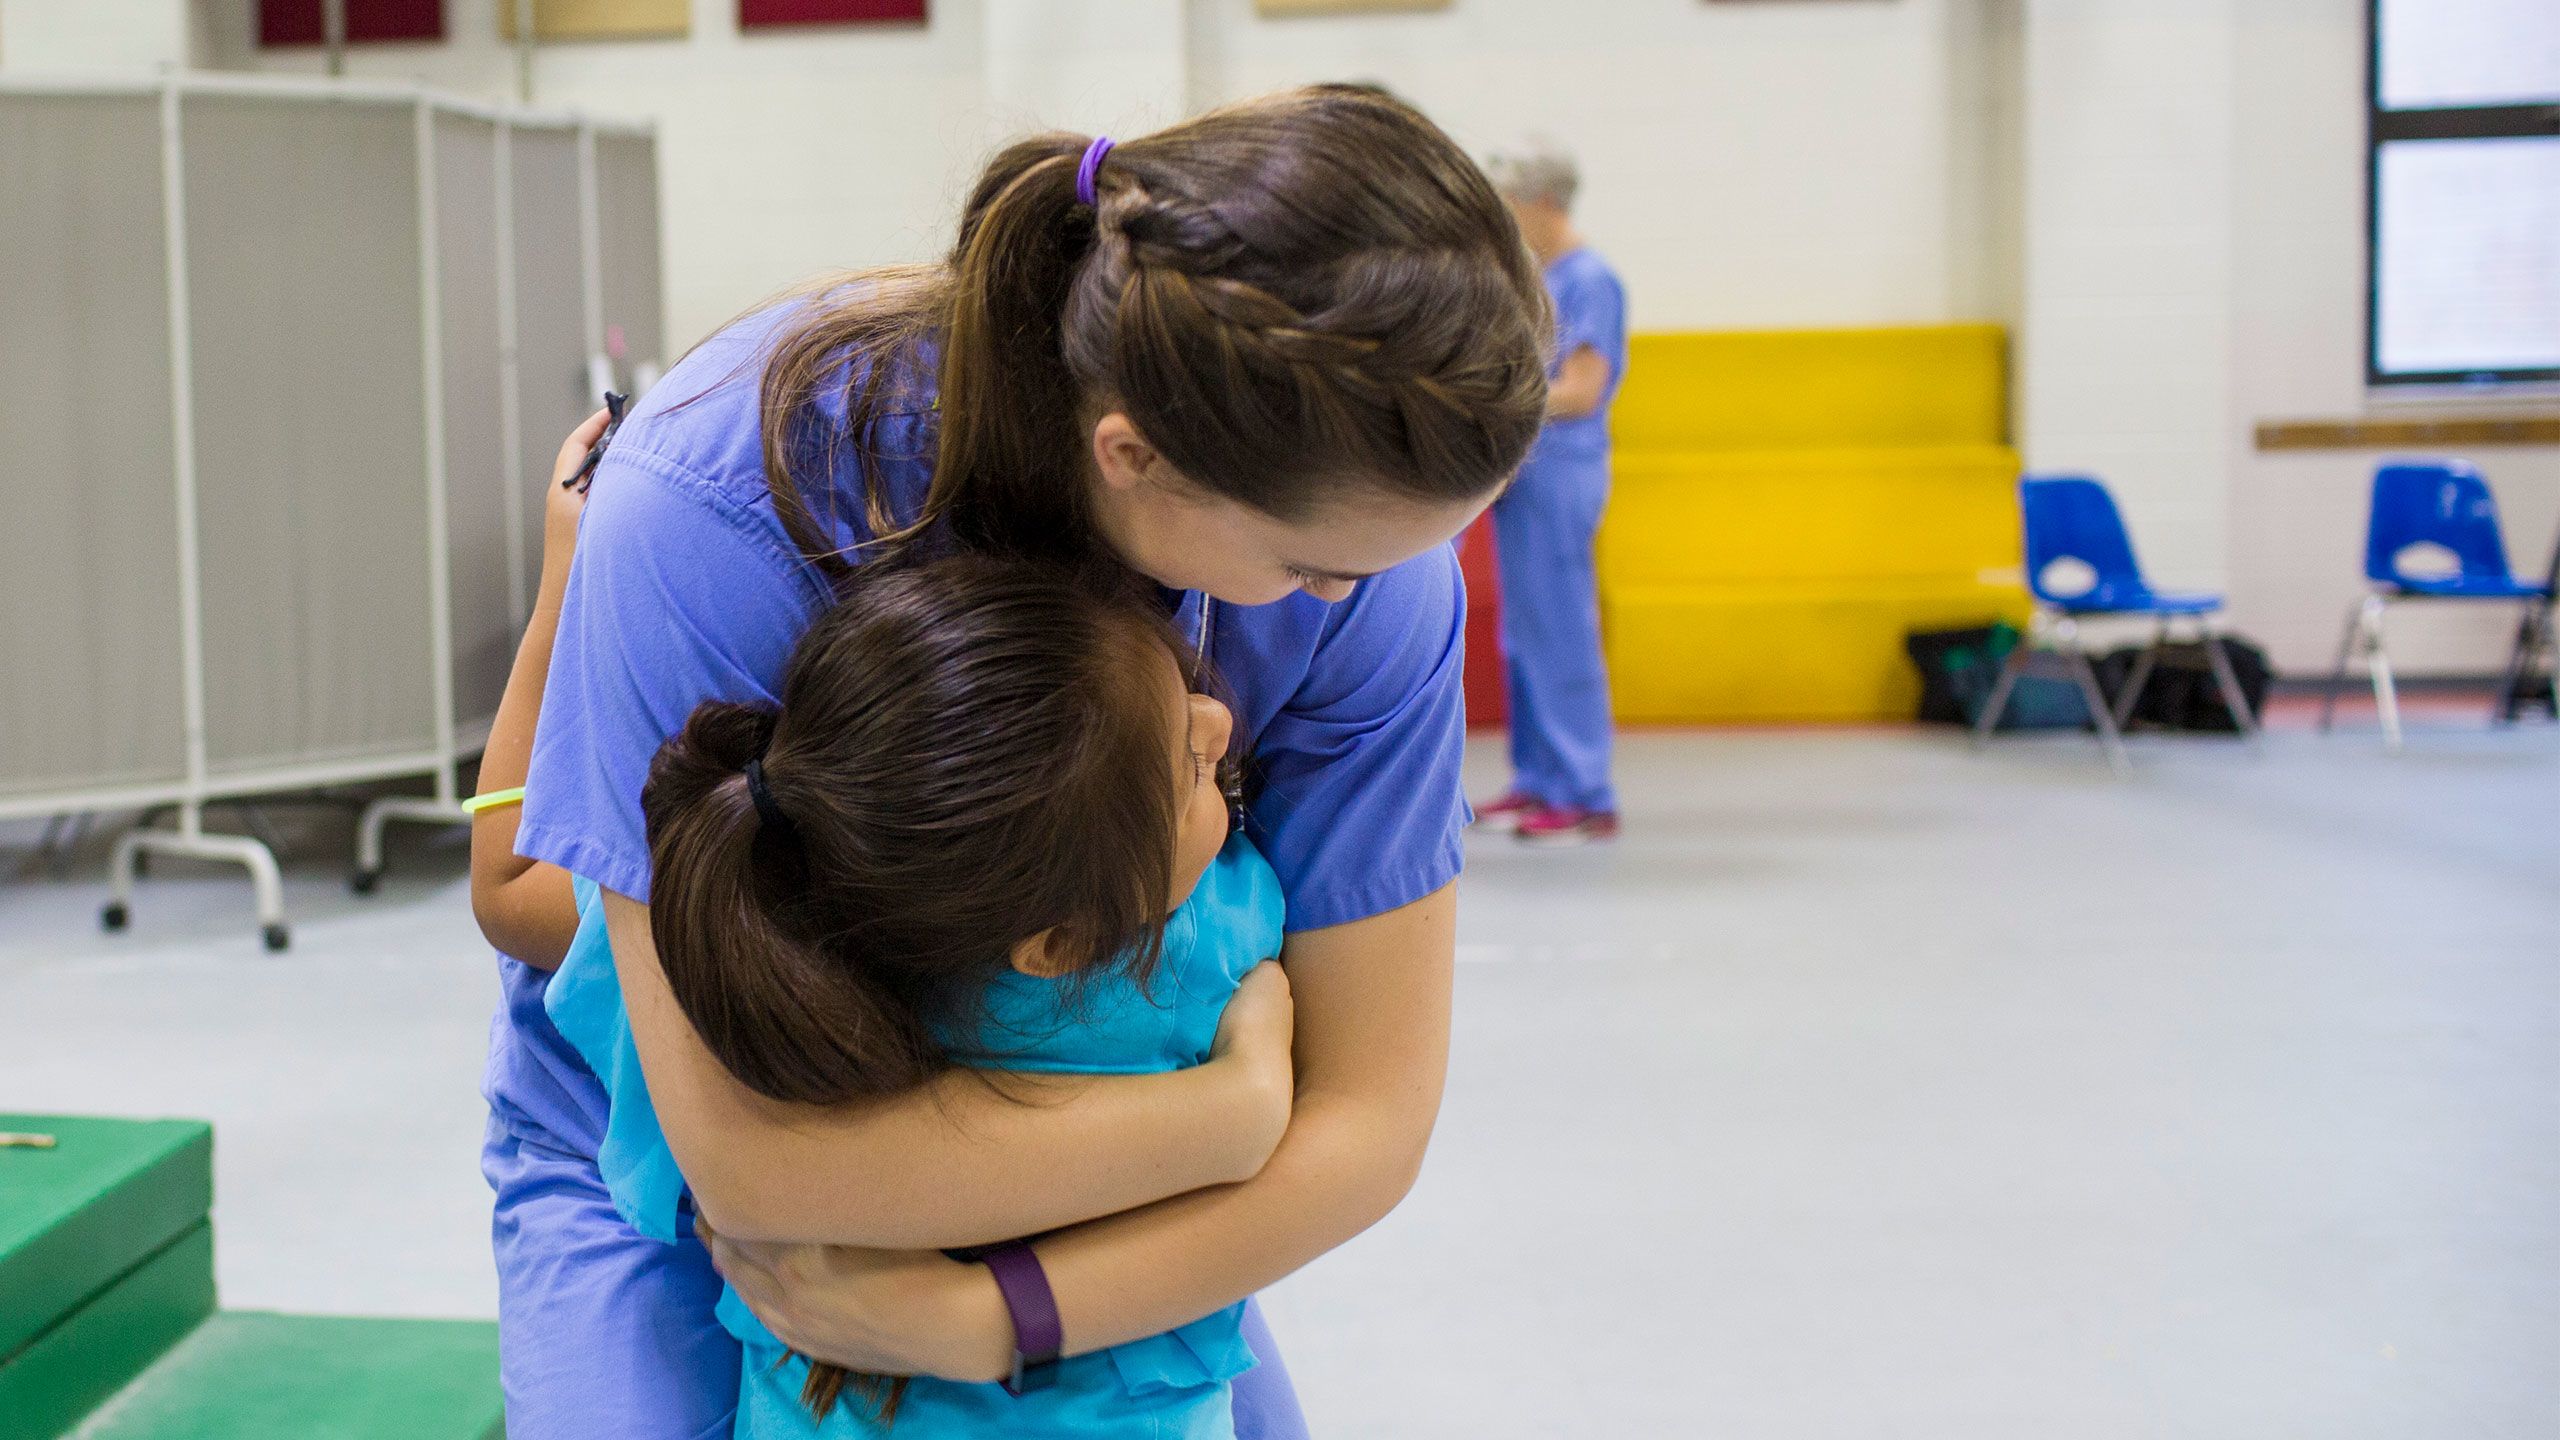 An Emory student volunteer hugs a young girl at a clinic for migrant farm workers and their families.